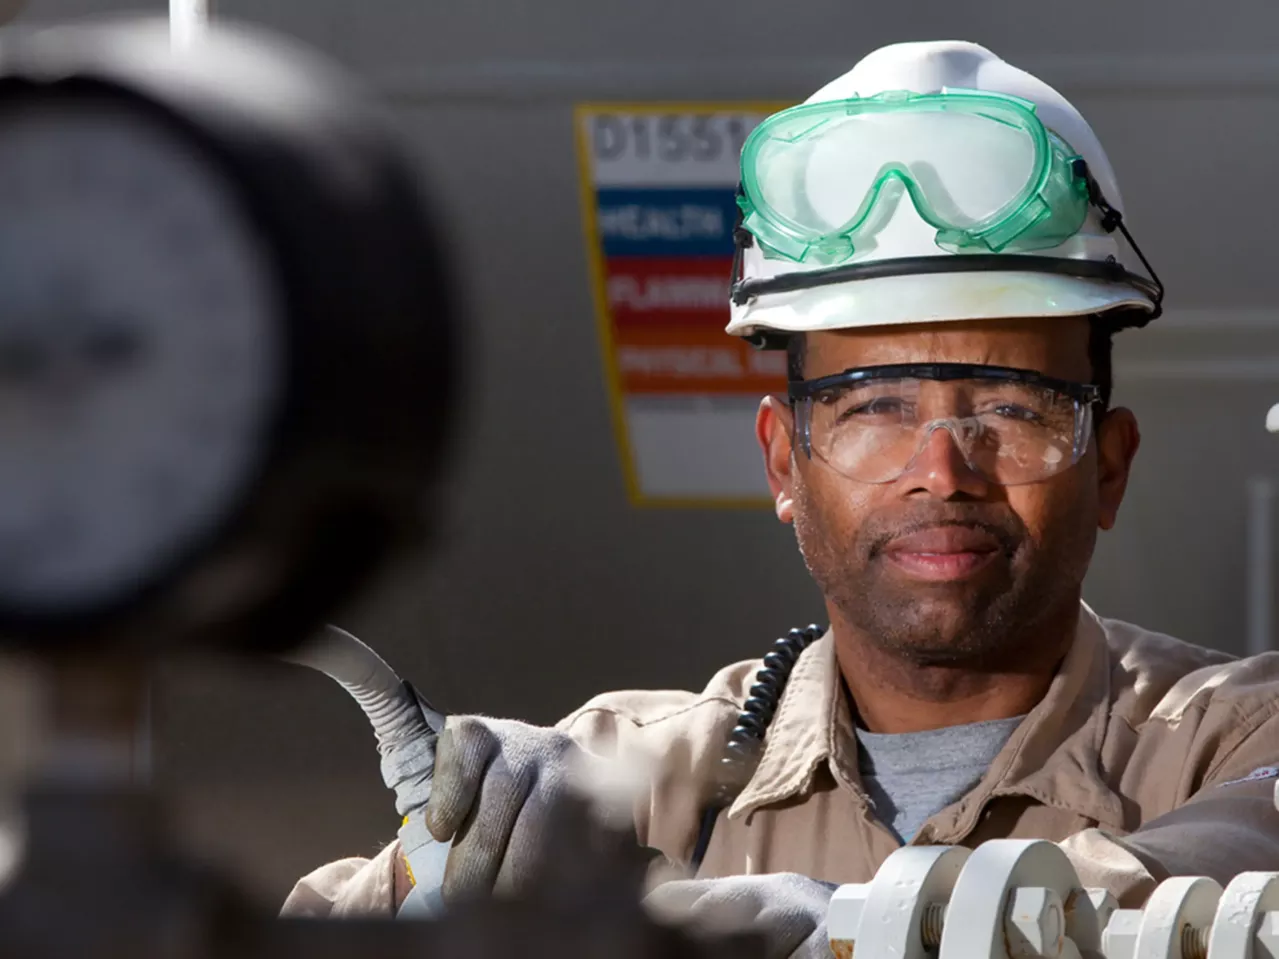 A worker wearing a white hard hat, safety goggles, and gloves operates equipment in an industrial setting. He stands behind machinery, maintaining a focused expression, with other industrial components and a gauge partially visible in the foreground.